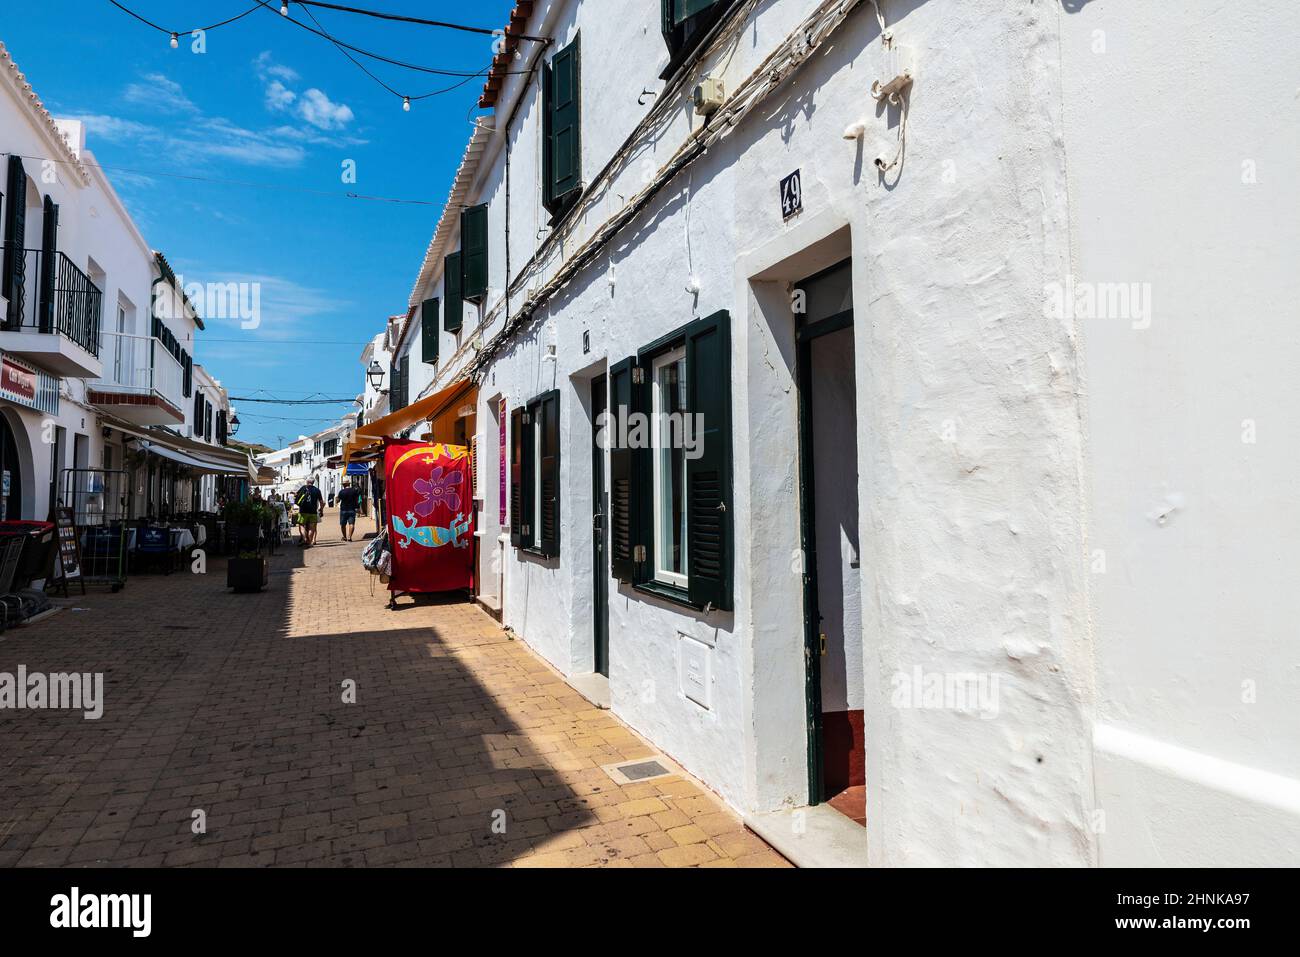 Fornells, Spain - July 21, 2021: Street of the fishing village of Fornells with people around on summer in Menorca, Balearic island, Spain Stock Photo